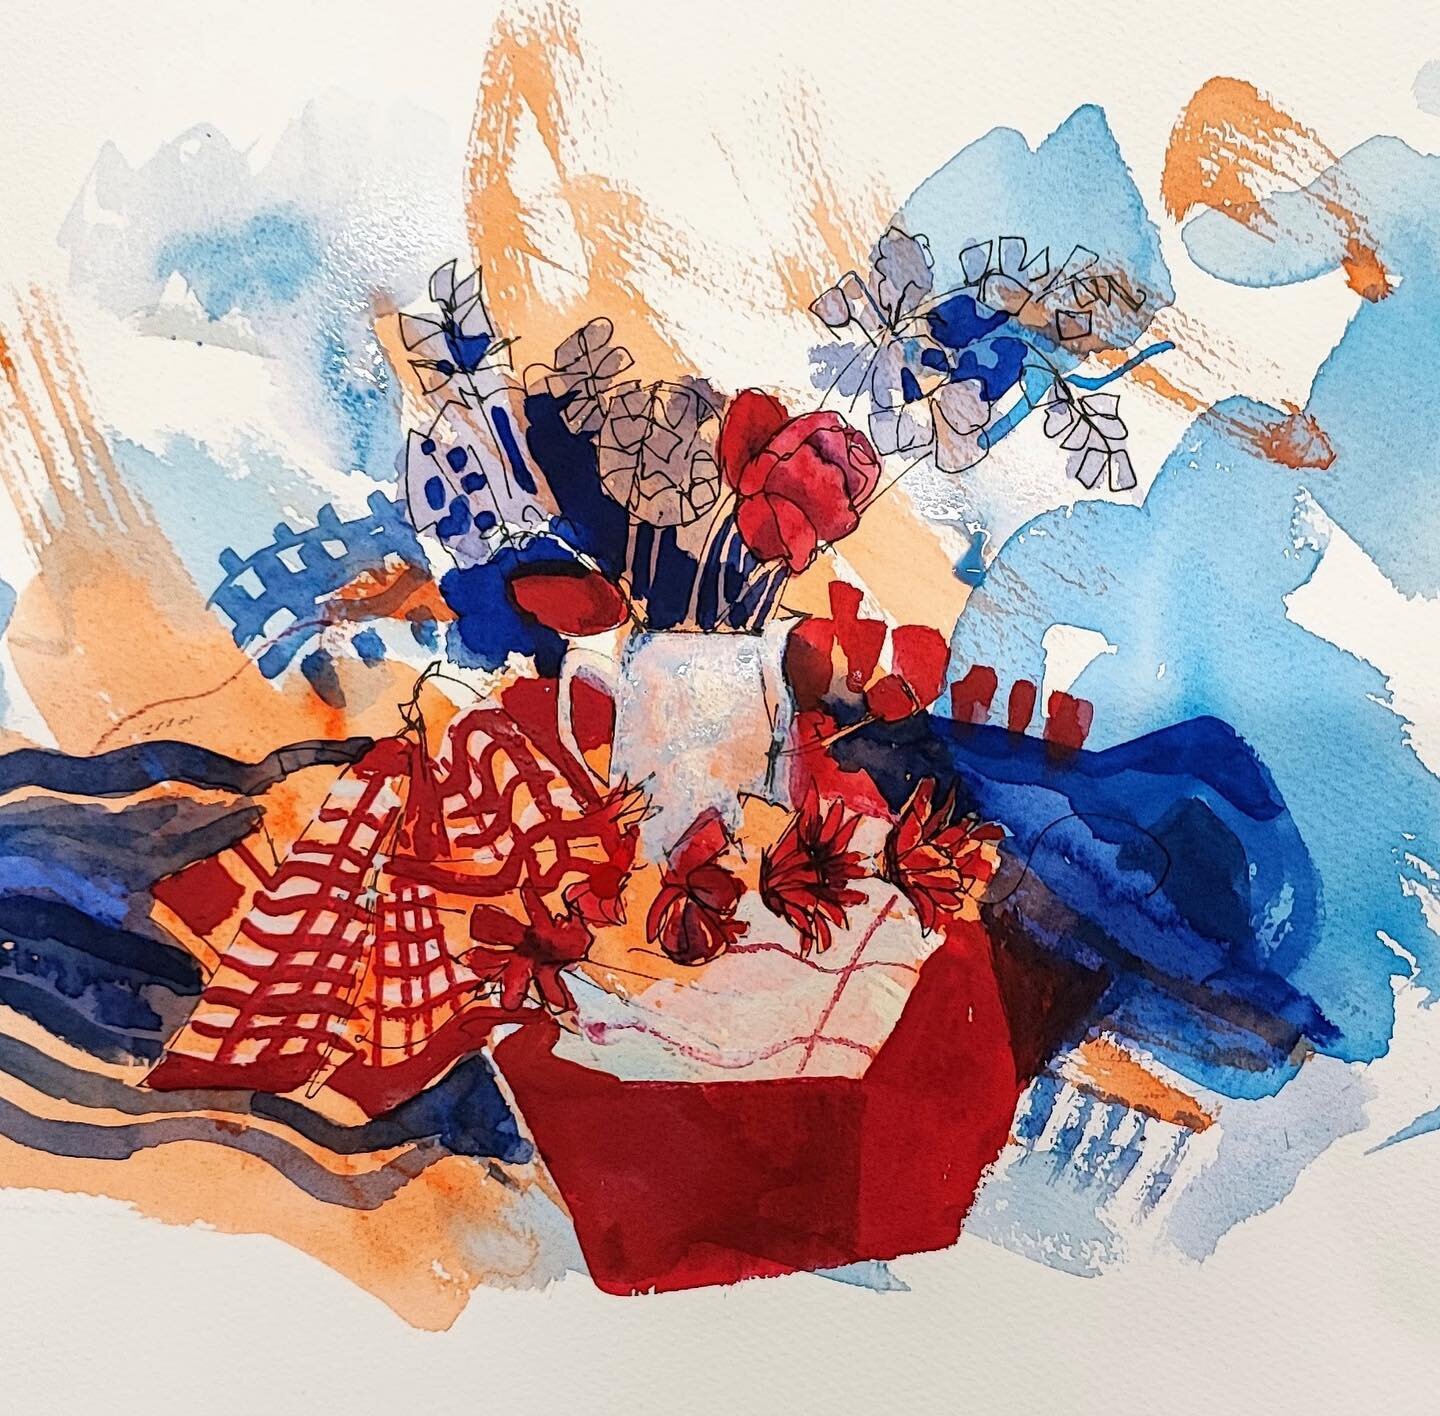 18th May. Red, white &amp; blue still-life event
This week the group held a still-life exercise painting objects of the aforementioned colours.  We saw some striking watercolour, ink and oil pastel work. 
#hallamartgroup #sheffieldartists #stilllife 